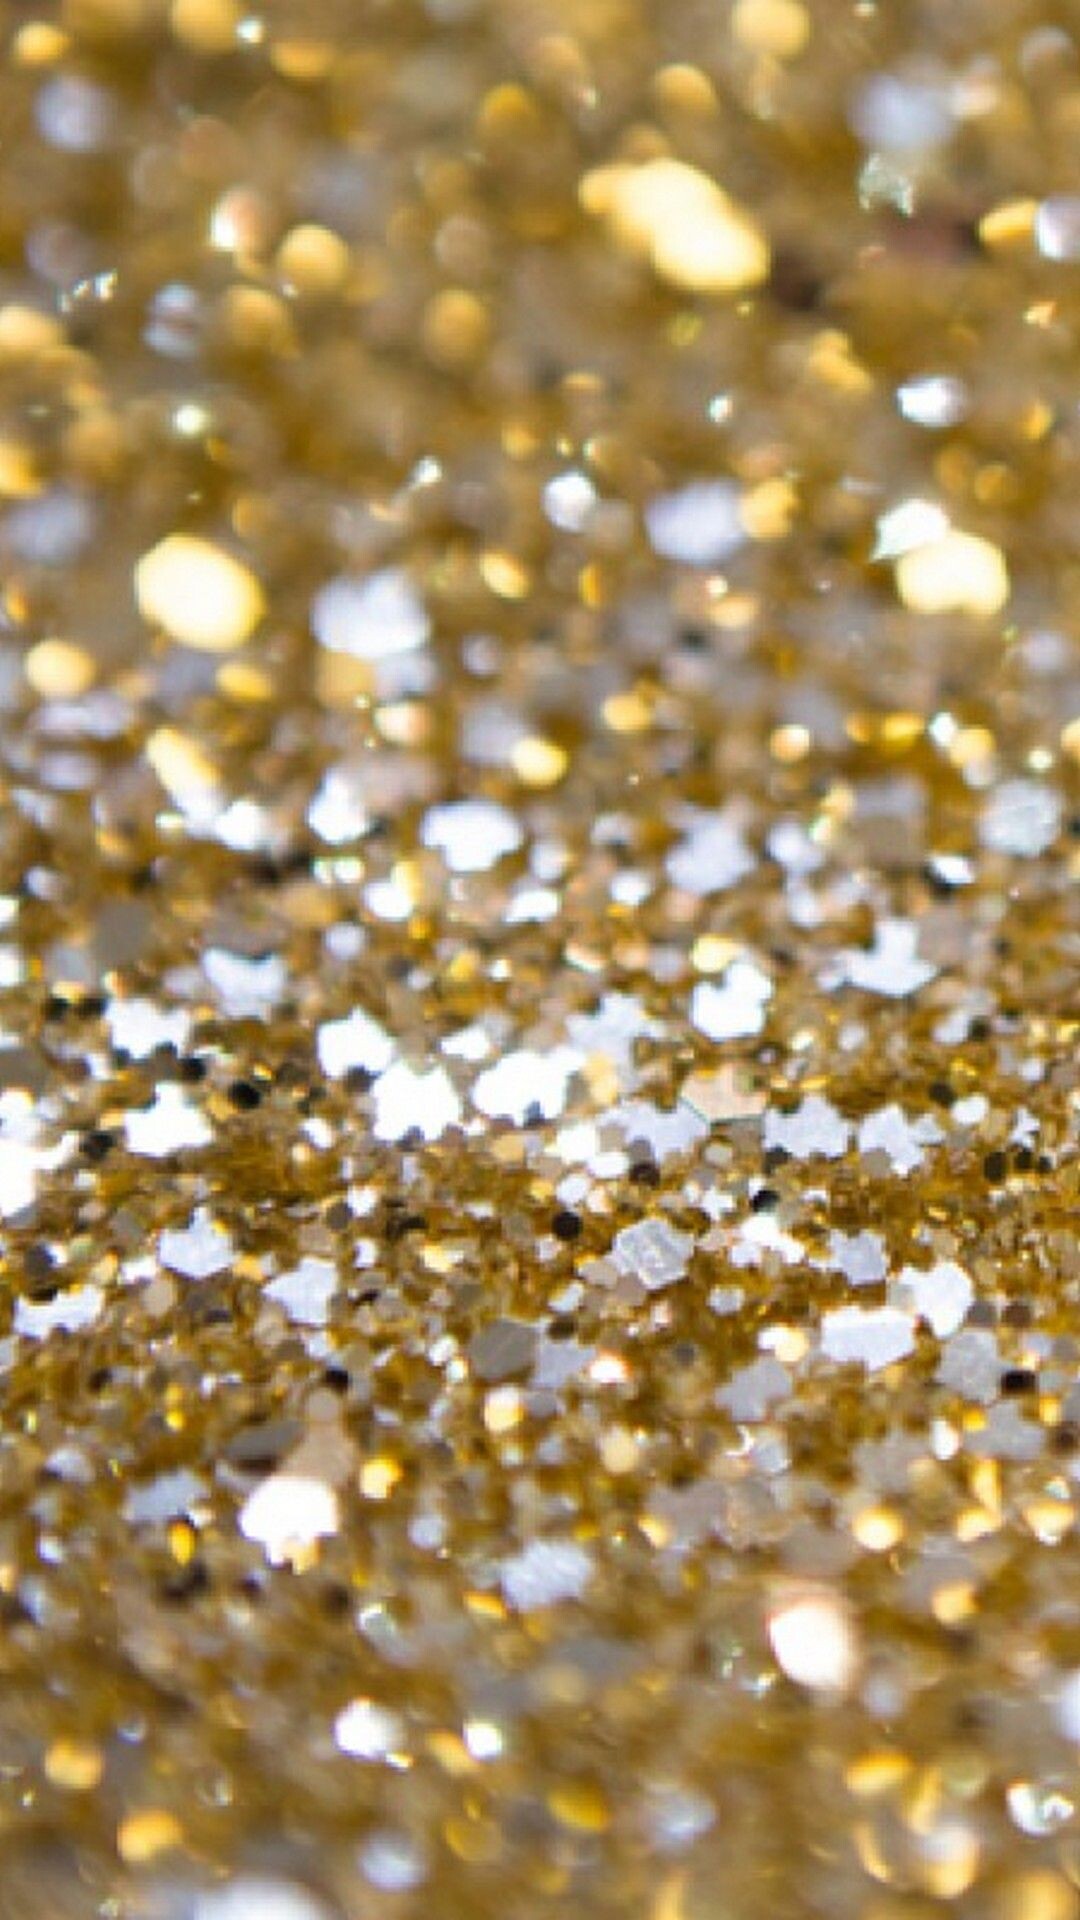 Gold Sparkle: Gold craft glitter made from PVC film cut into tiny particles, Shiny decoration. 1080x1920 Full HD Wallpaper.